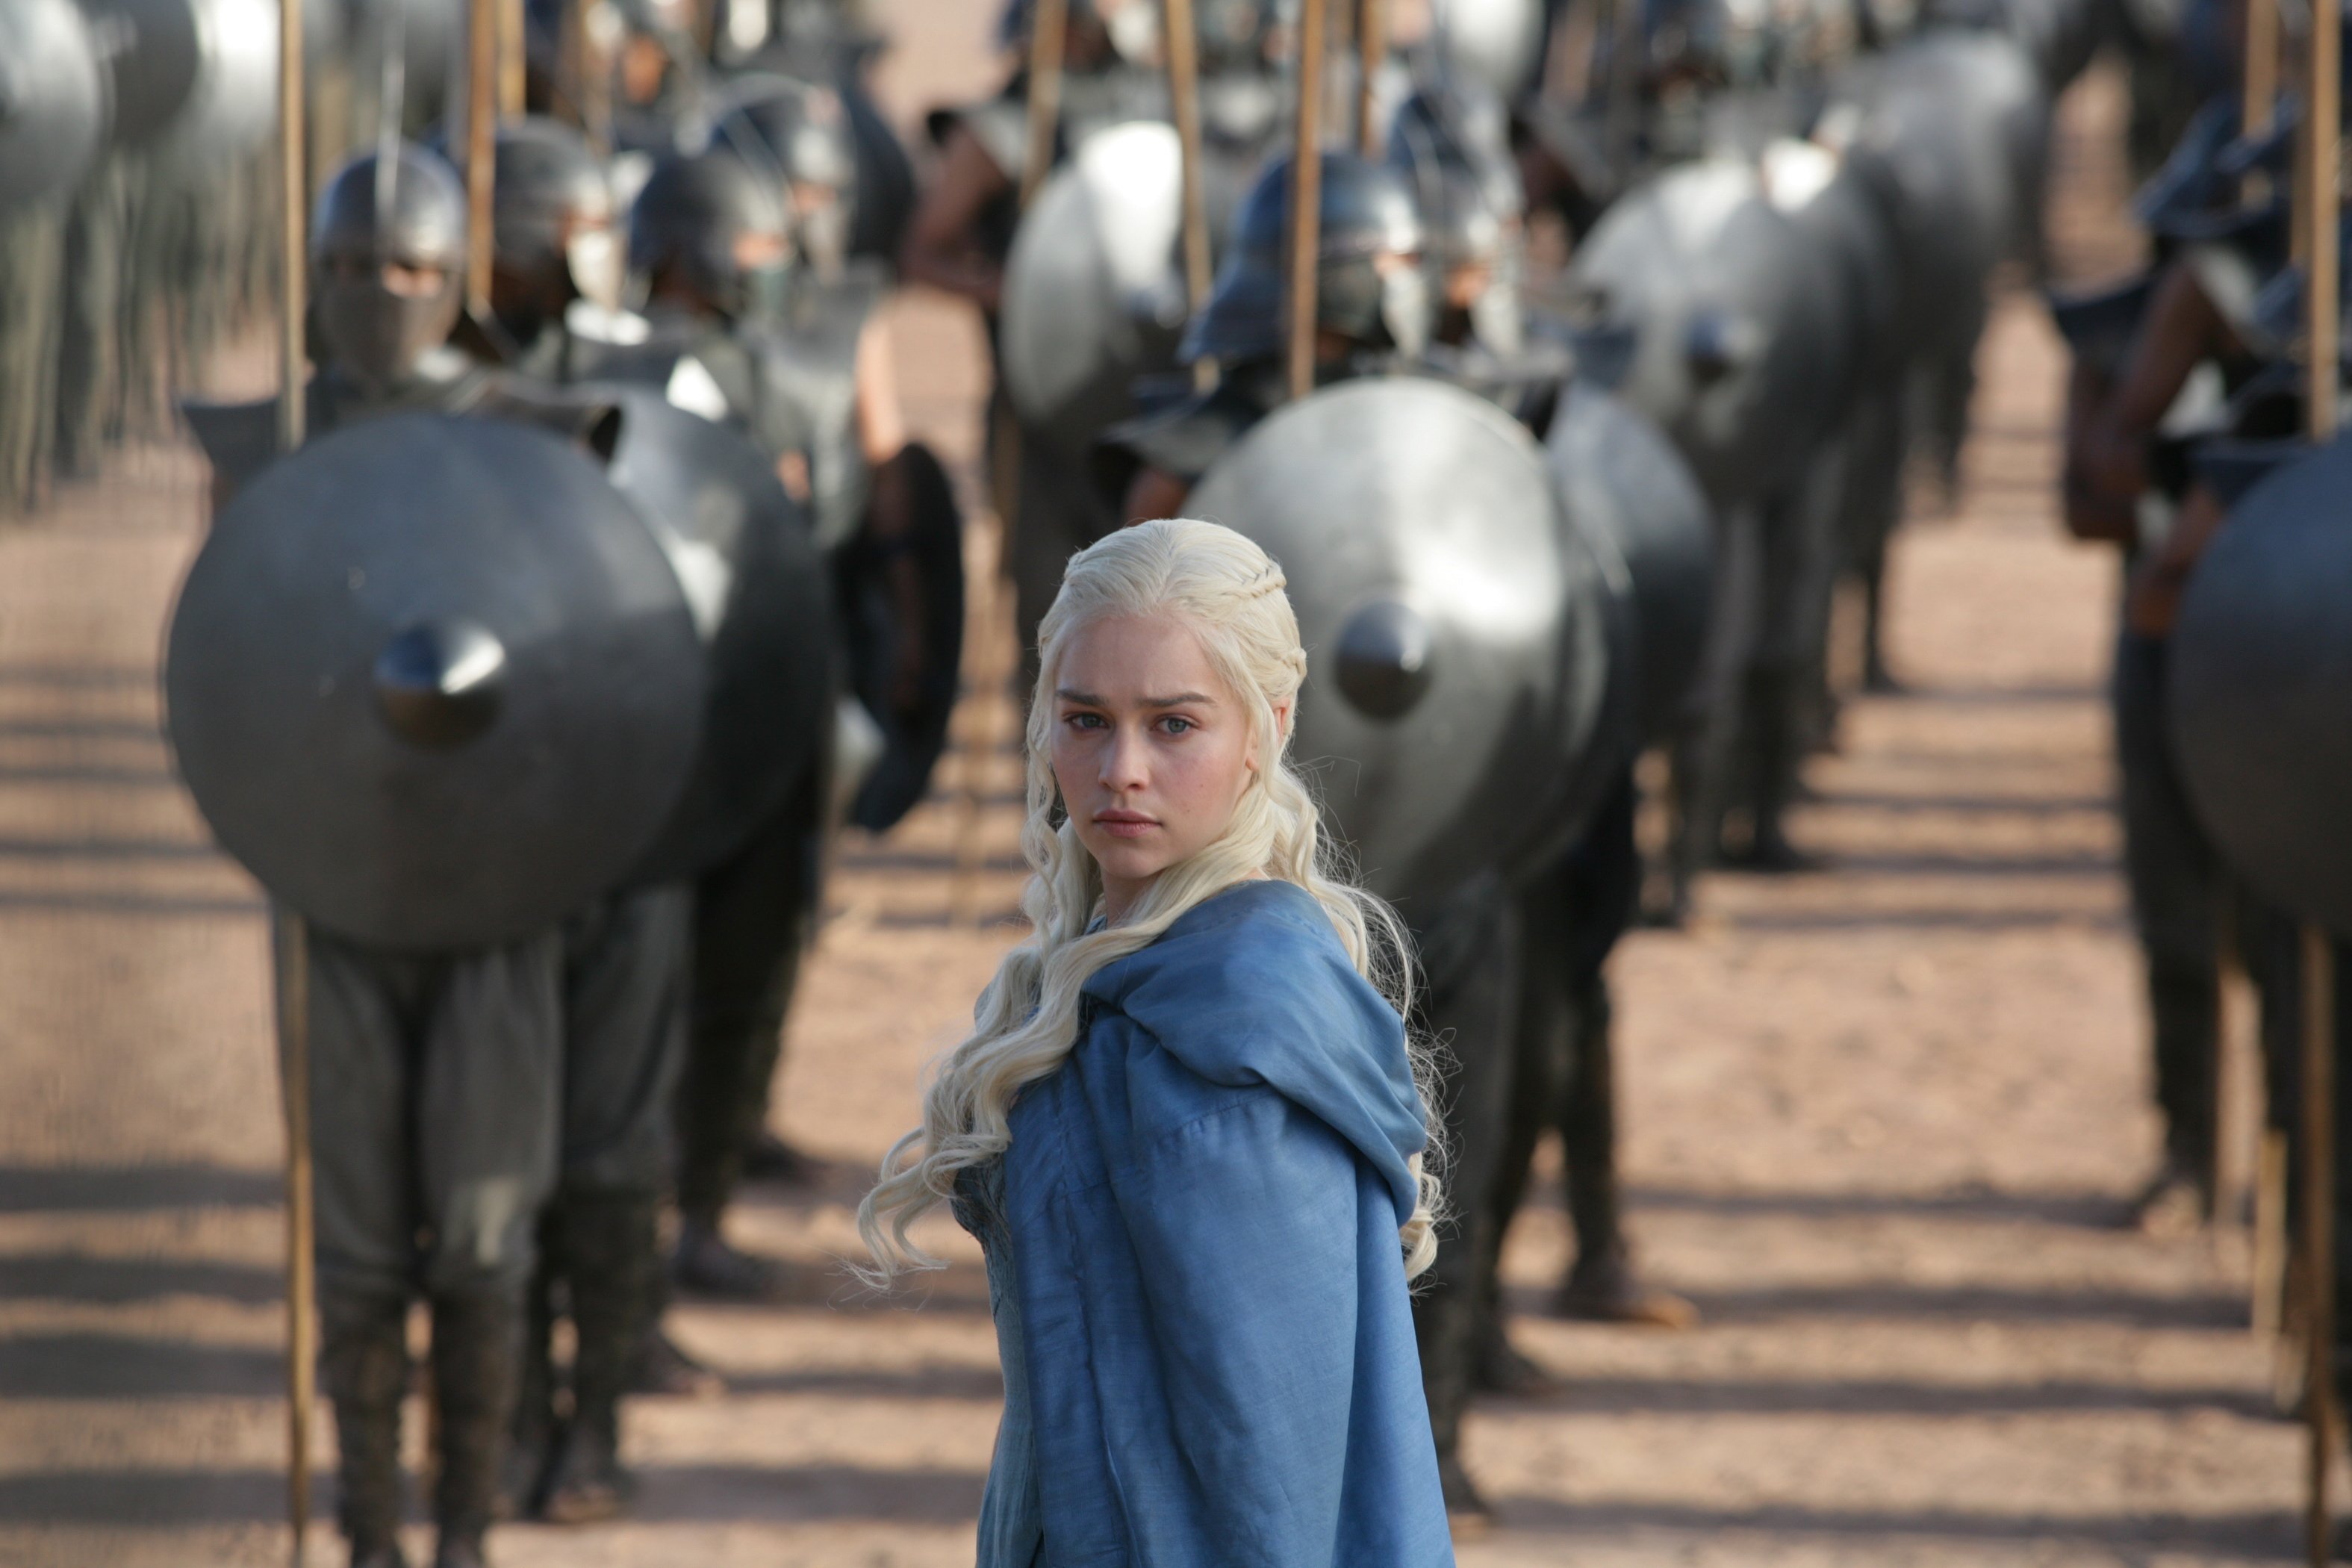 Emilia Clarke in a scene from Game of Thrones, which was written by George R.R. Martin. Photo: AP